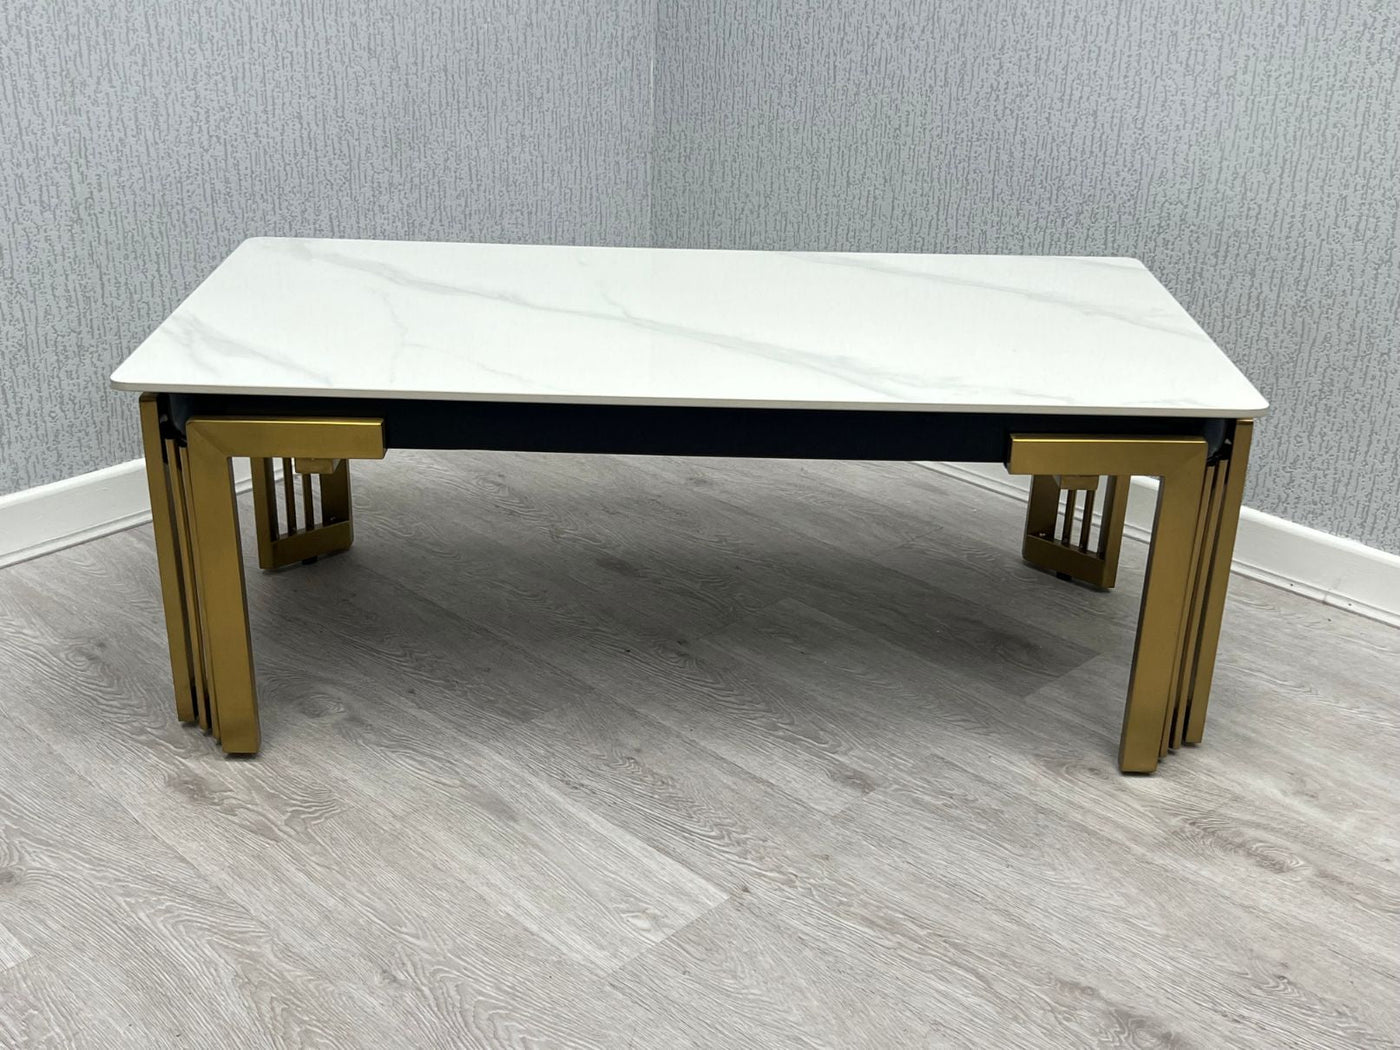 Sorrento 150cm Gold Dining Table with White Ceramic Marble Top + Cream/Gold Lion Knocker Velvet Chairs